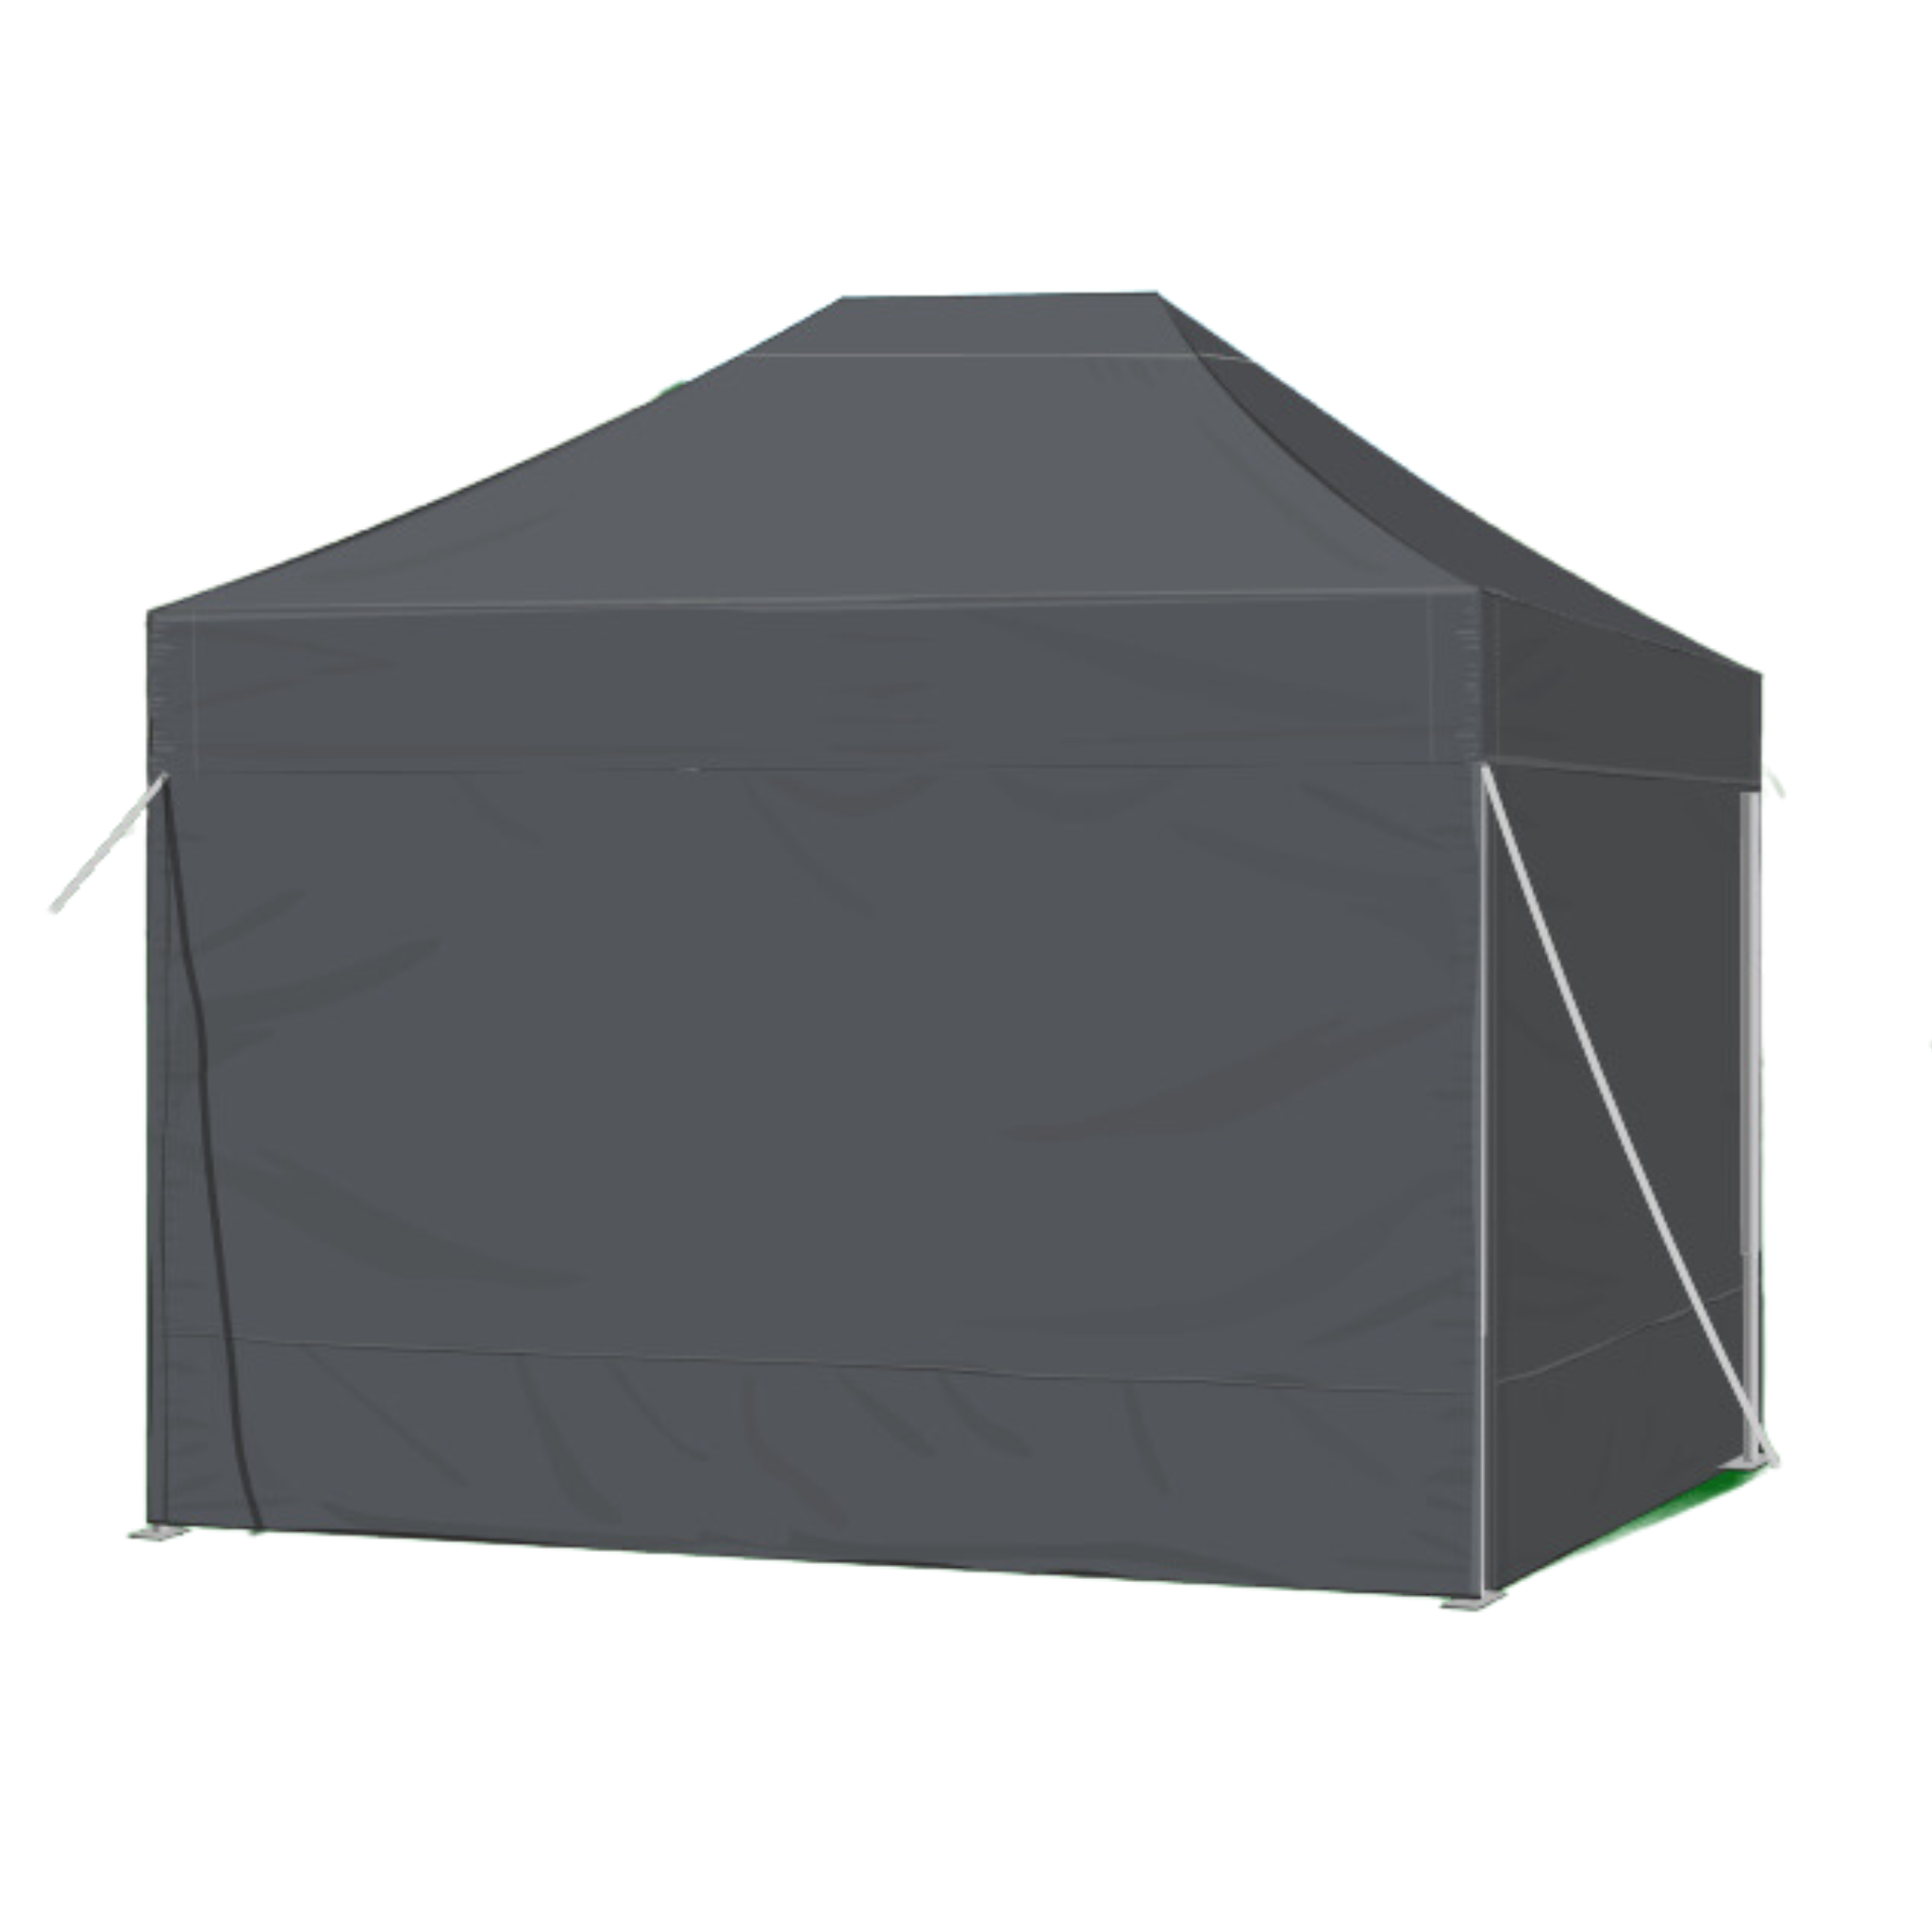 Lavabis folding tent system side walls 3x4.5 meters